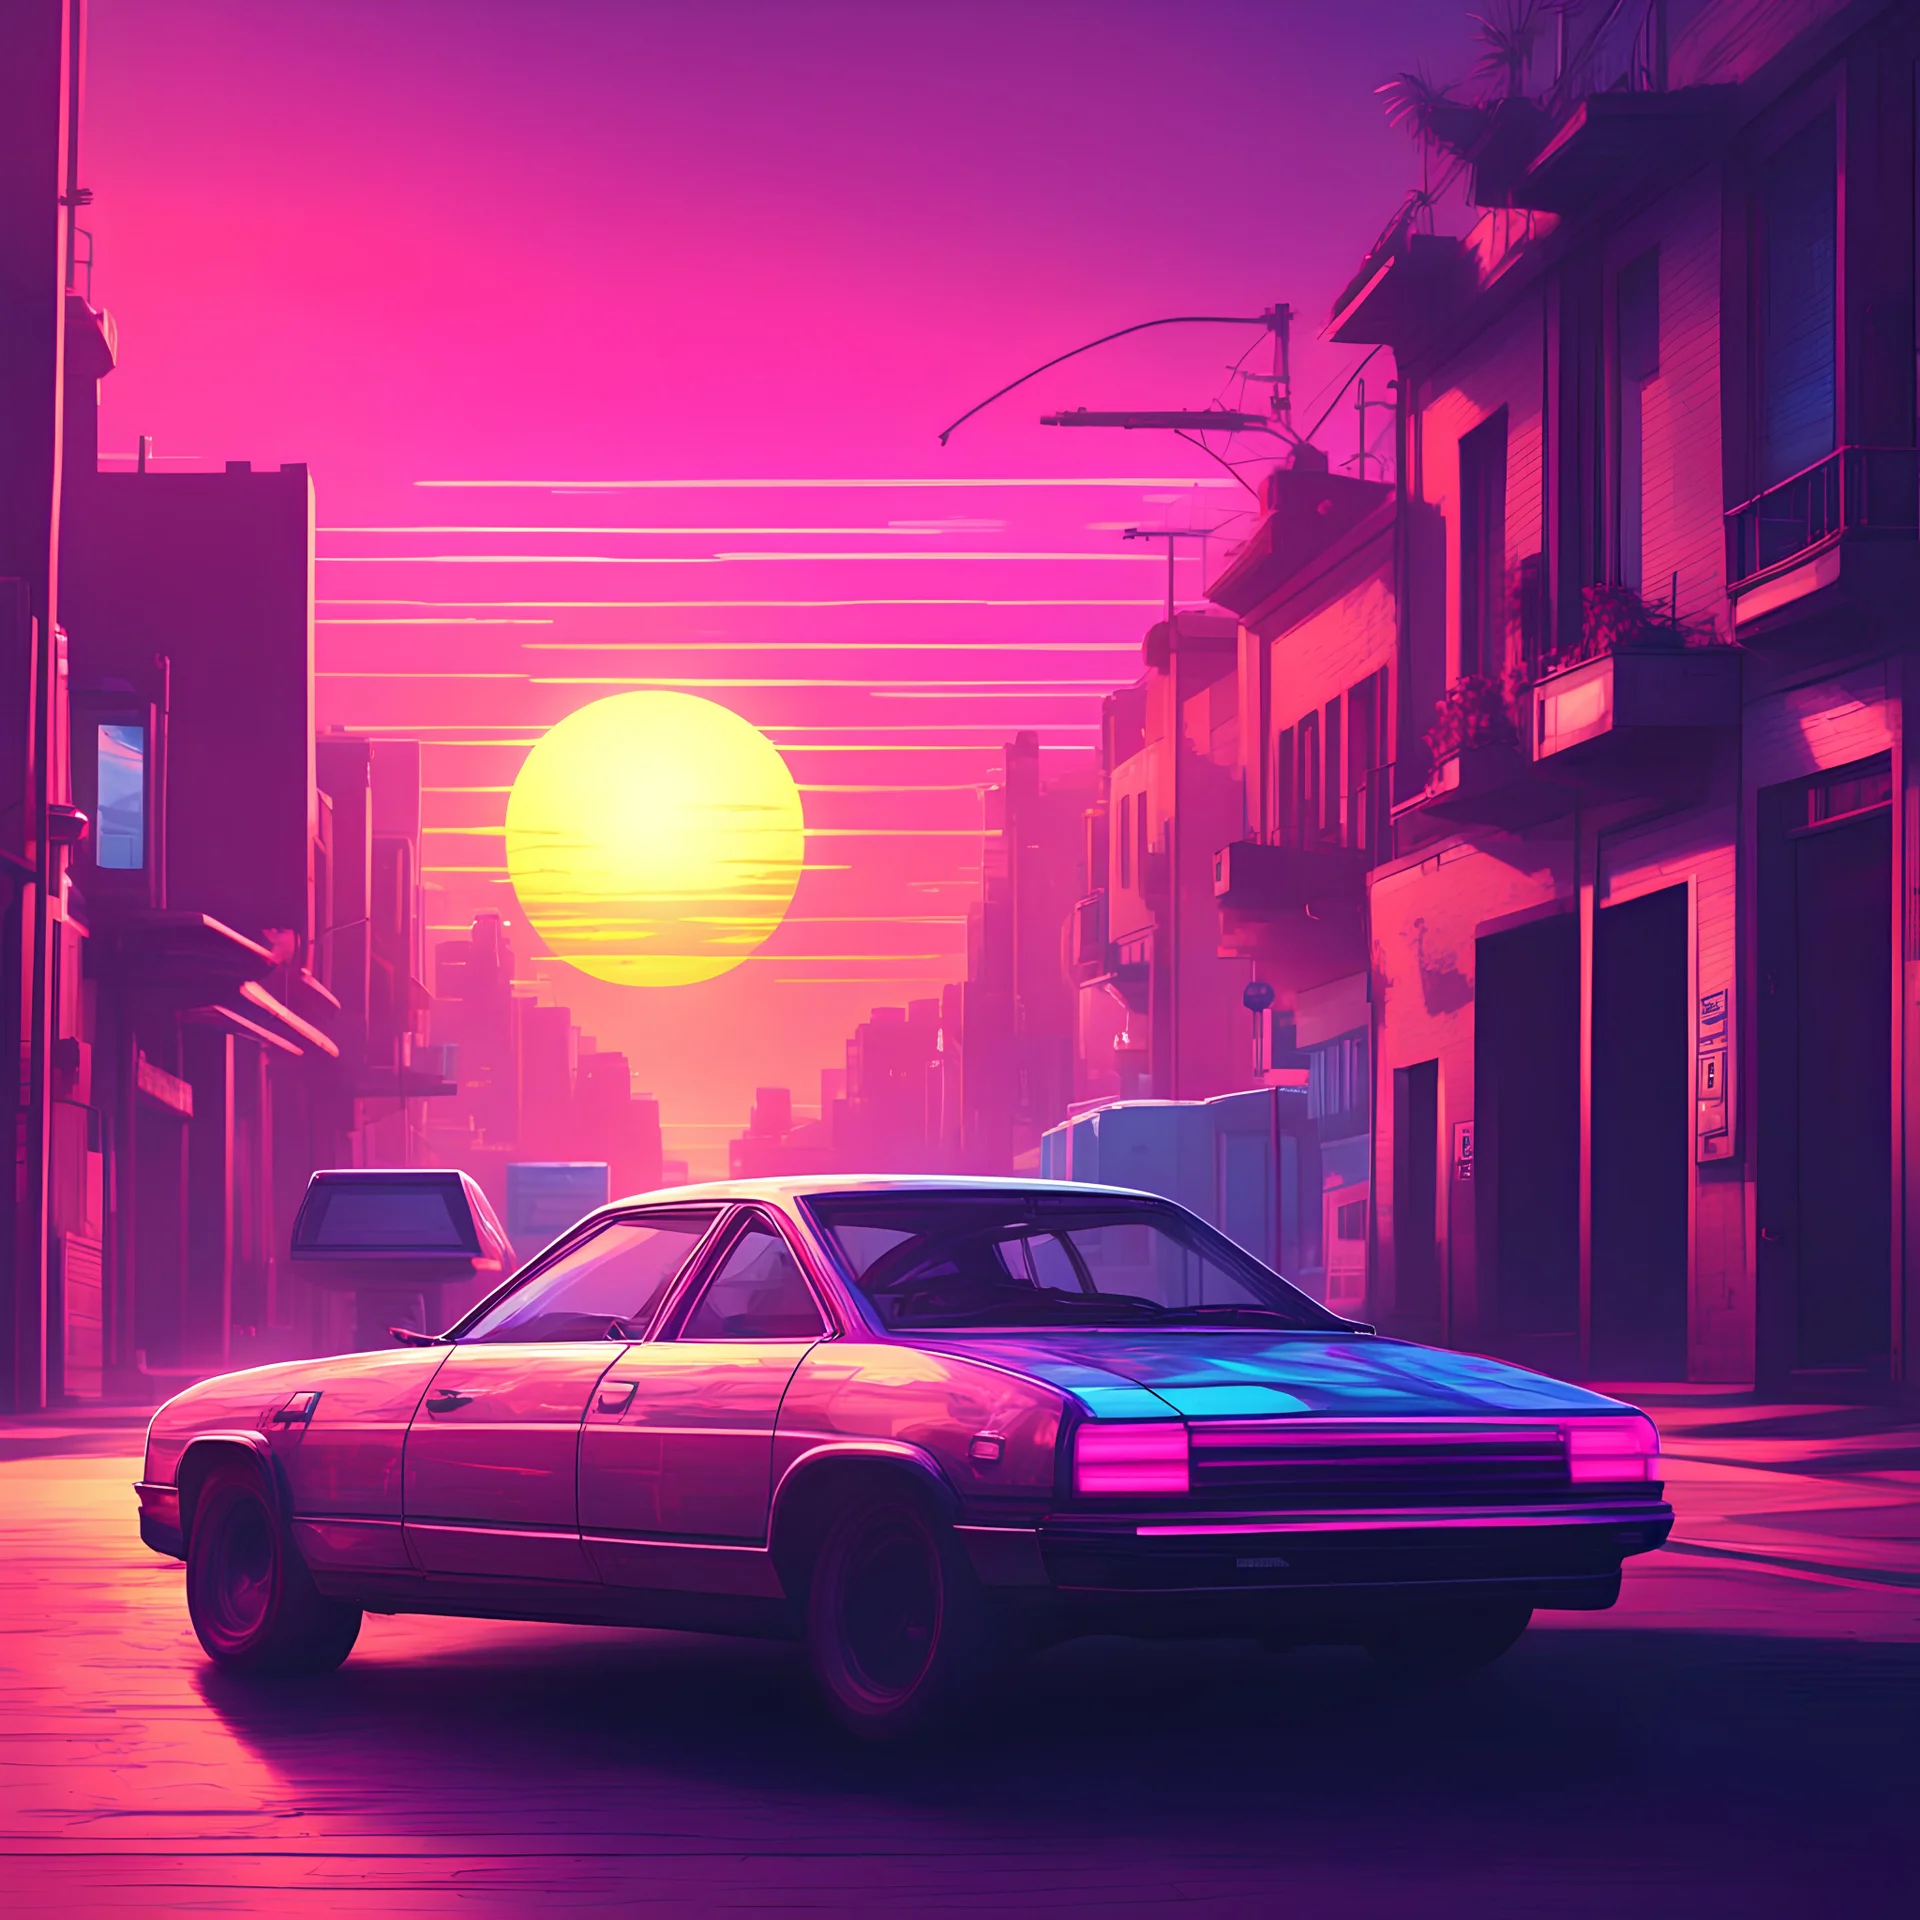 car time machine in a street, synthwave picture style with light pixel, the sunset on the horizon, with a big pixelated sun